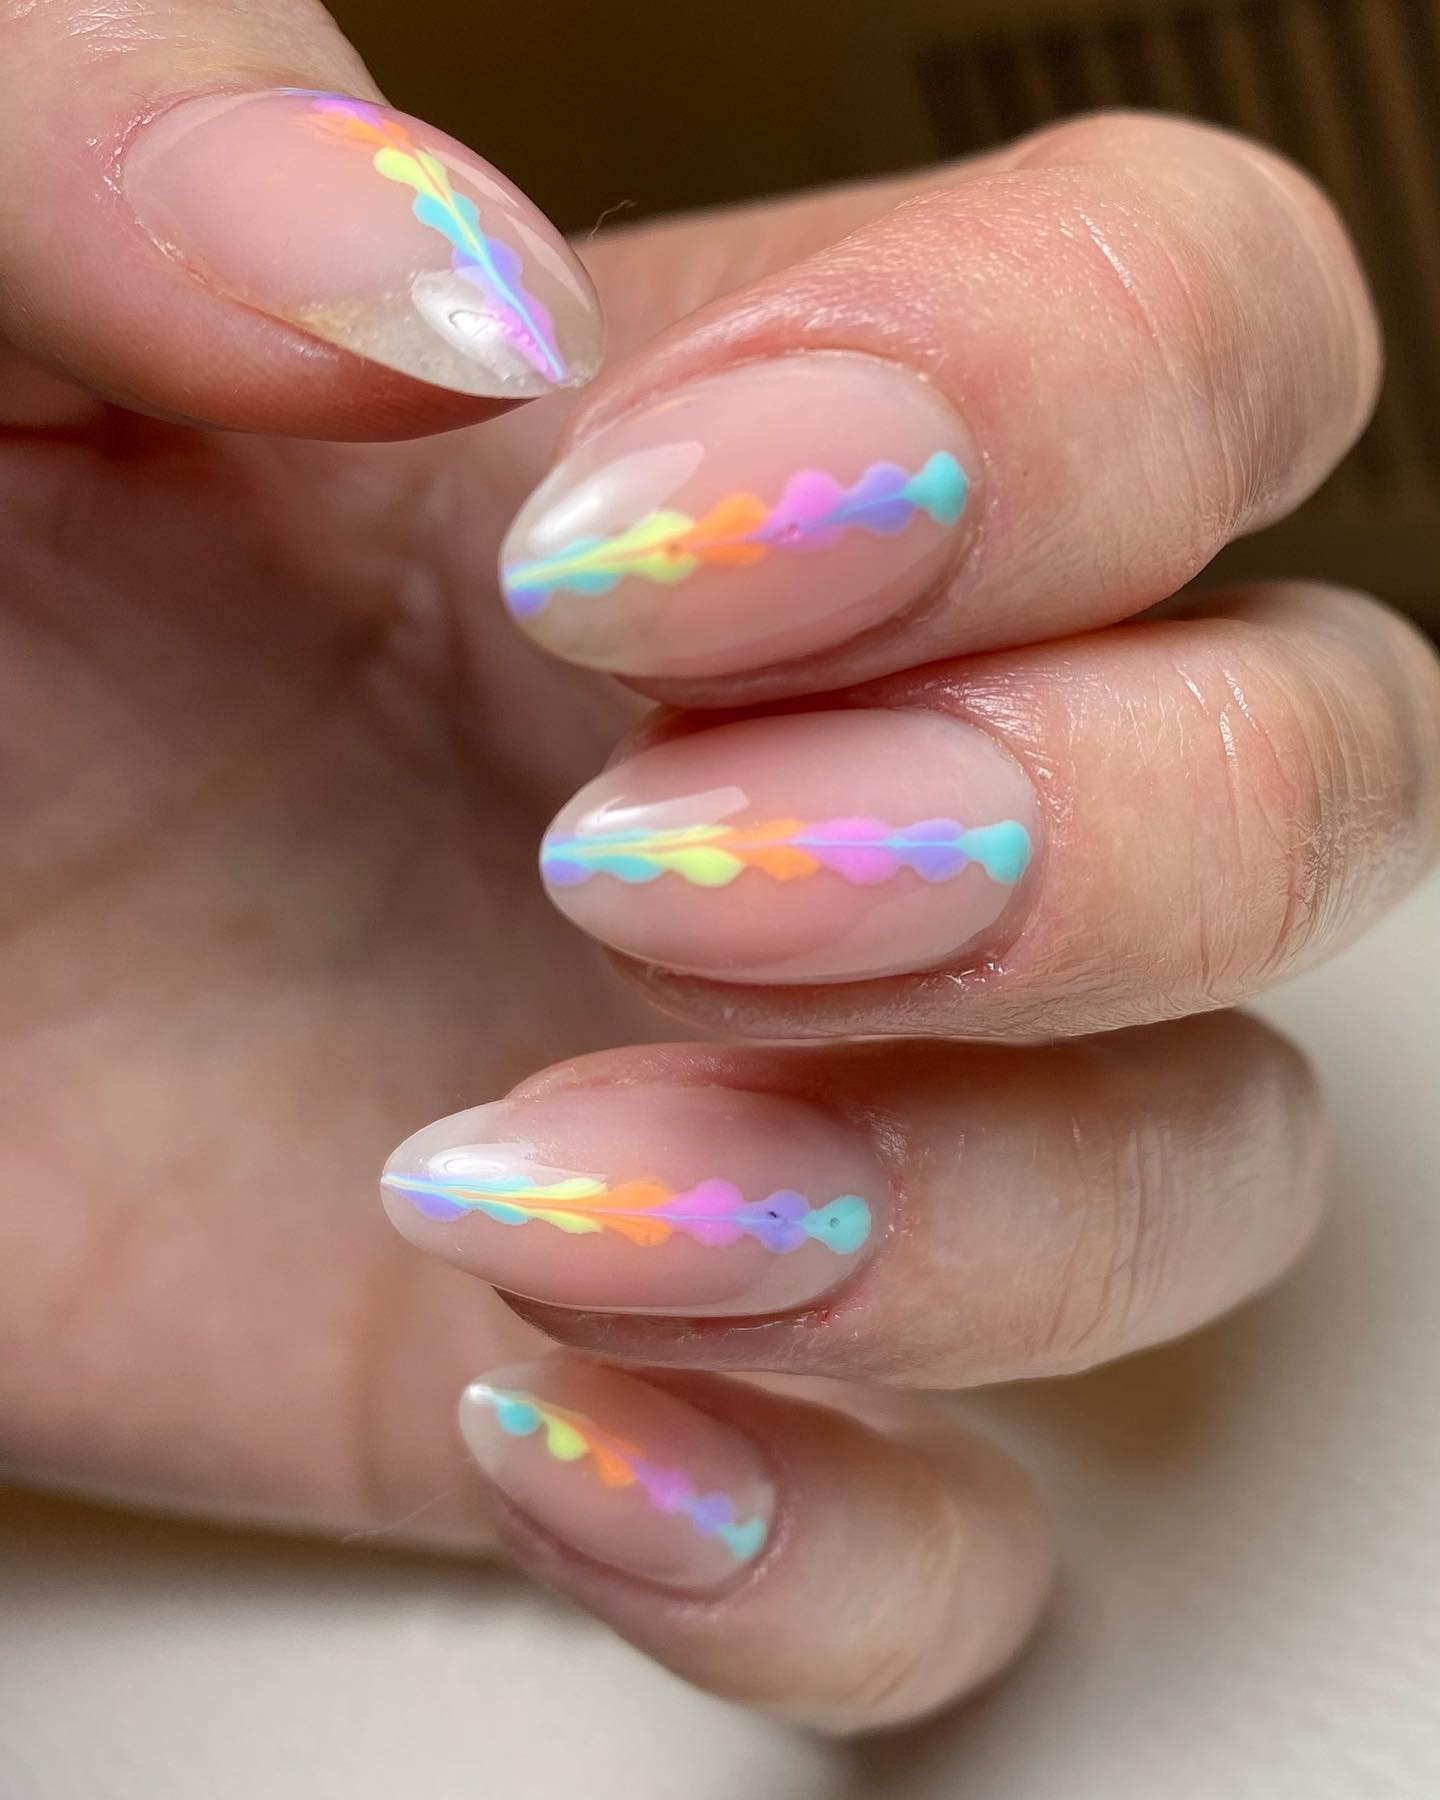 Pastel rainbows and fluffy white clouds, hand-painted by me. : r/Nails